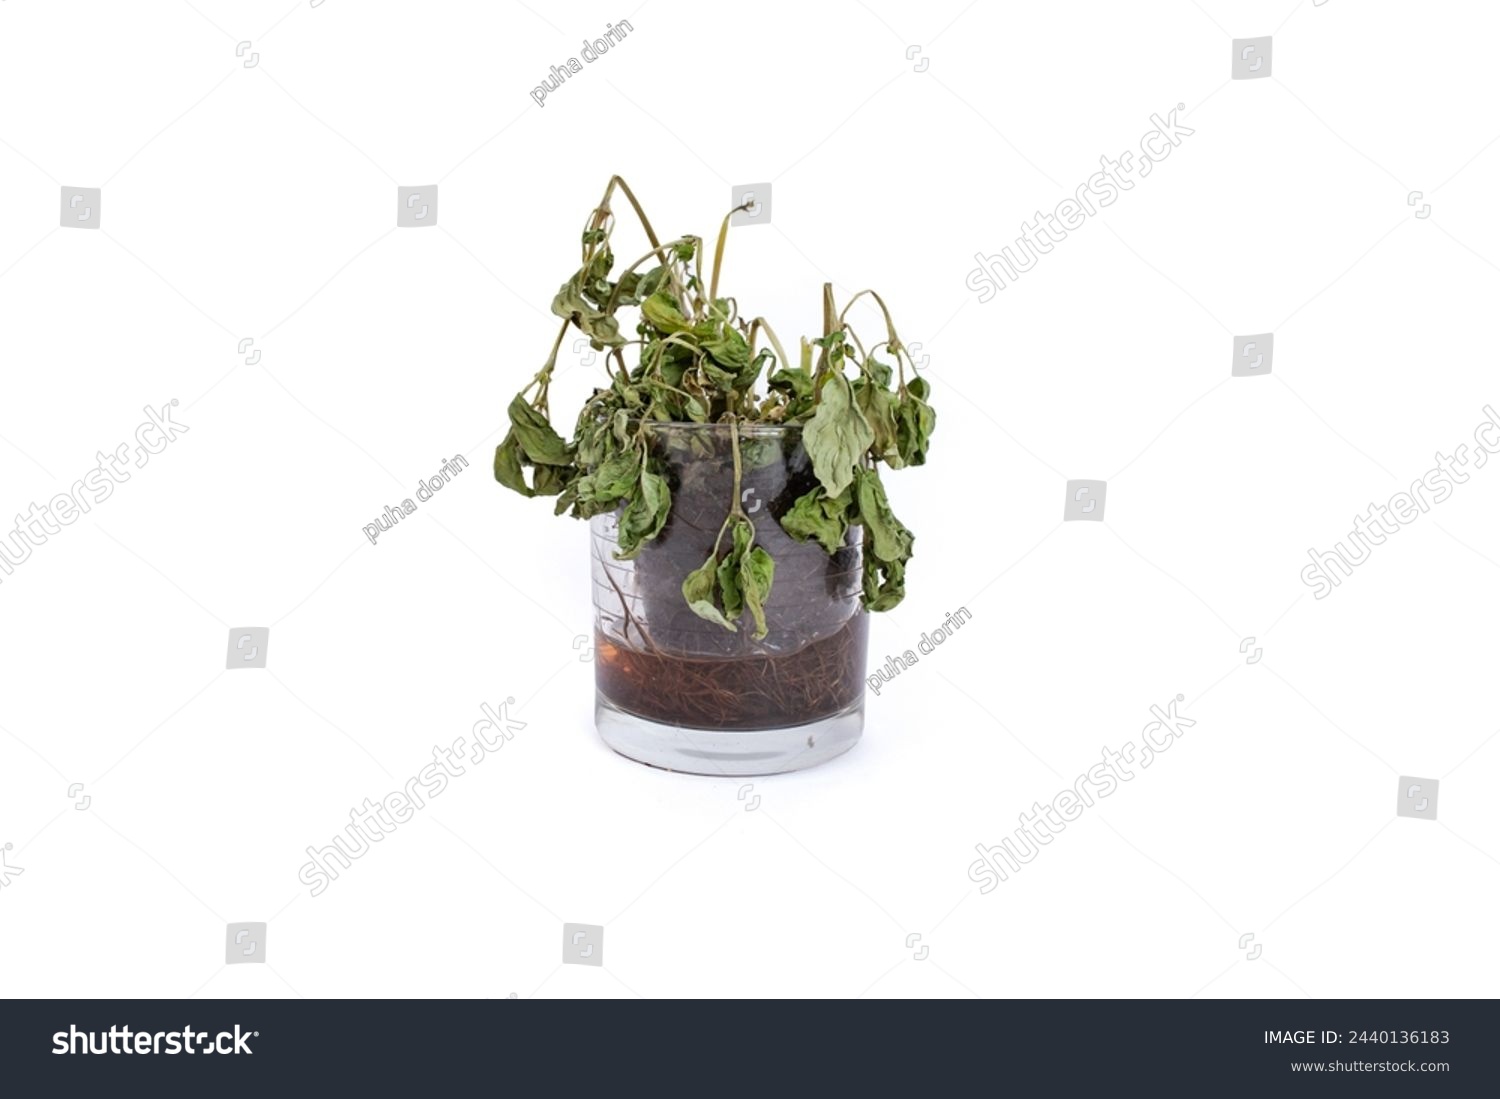 Dead plant with   roots structure in a transparent glass with water, isolated on white background, soft focus close up #2440136183